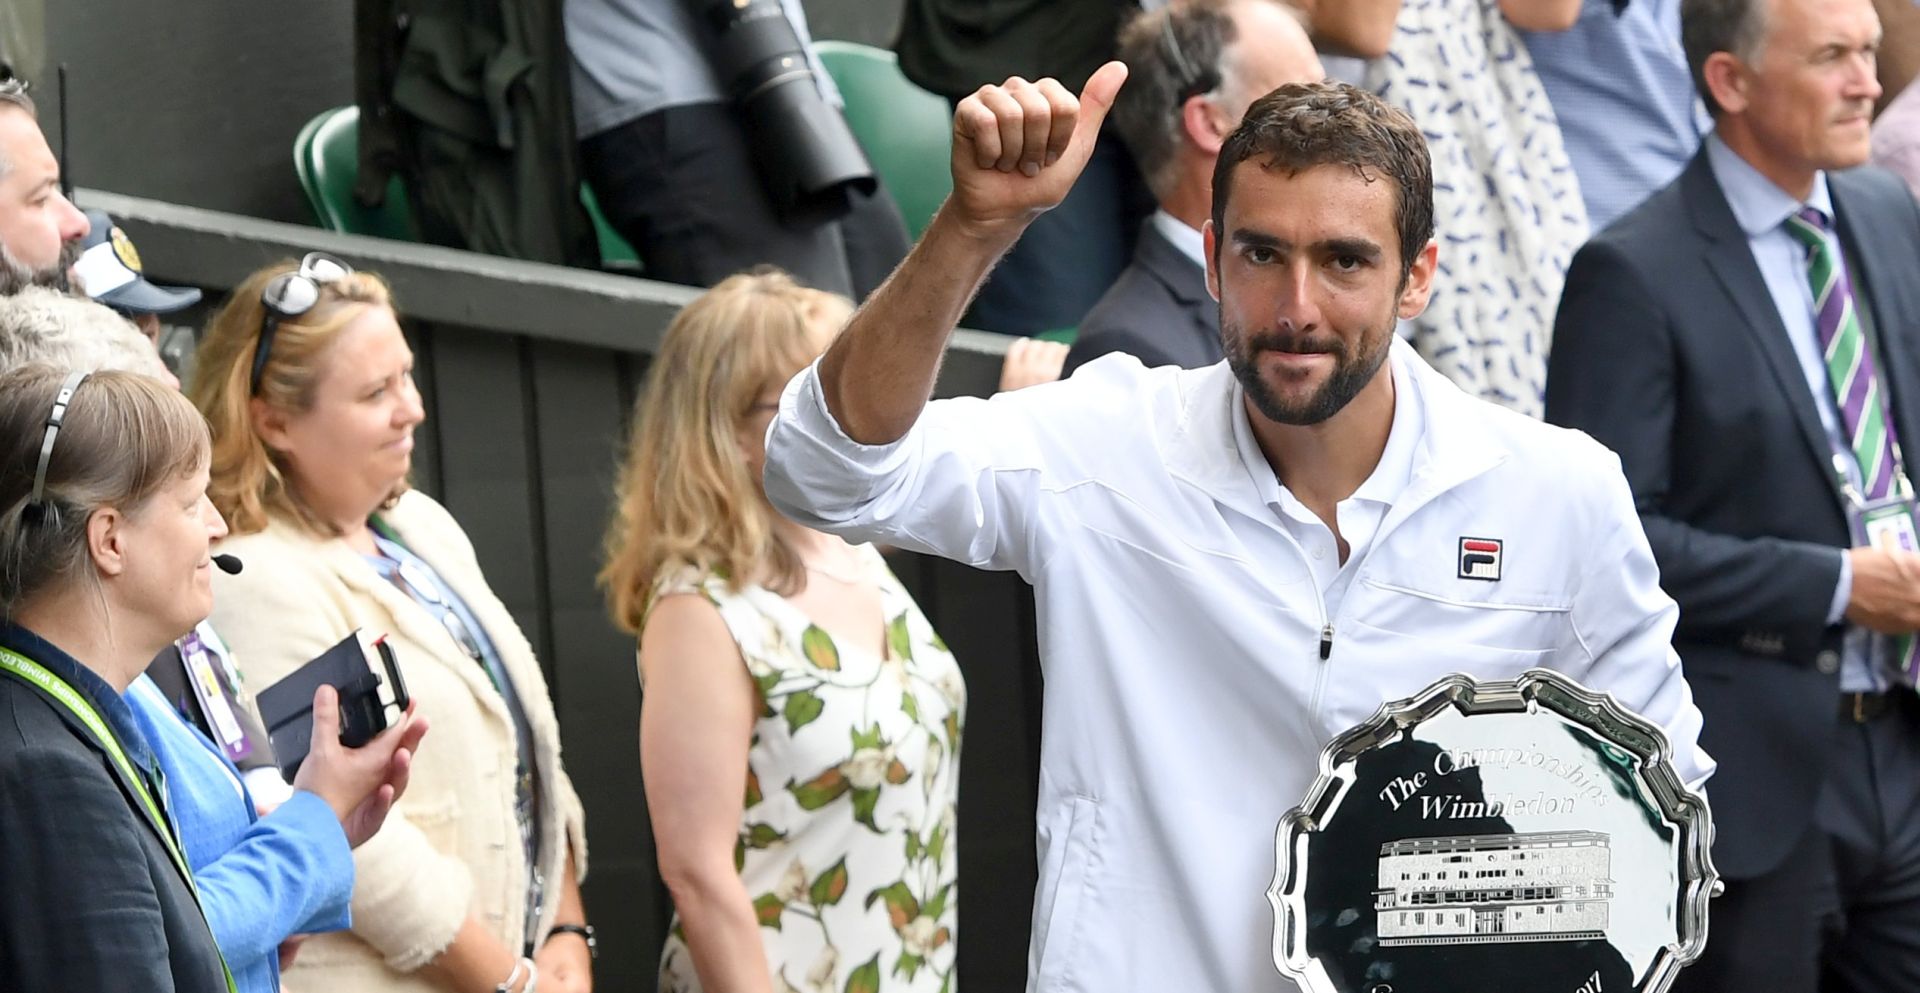 epa06091286 Marin Cilic of Croatia poses with the runner up trophy after losing against Roger Federer of Switzerland during the Men's final match for the Wimbledon Championships at the All England Lawn Tennis Club, in London, Britain, 16 July 2017.  EPA/FACUNDO ARRIZABALAGA EDITORIAL USE ONLY/NO COMMERCIAL SALES